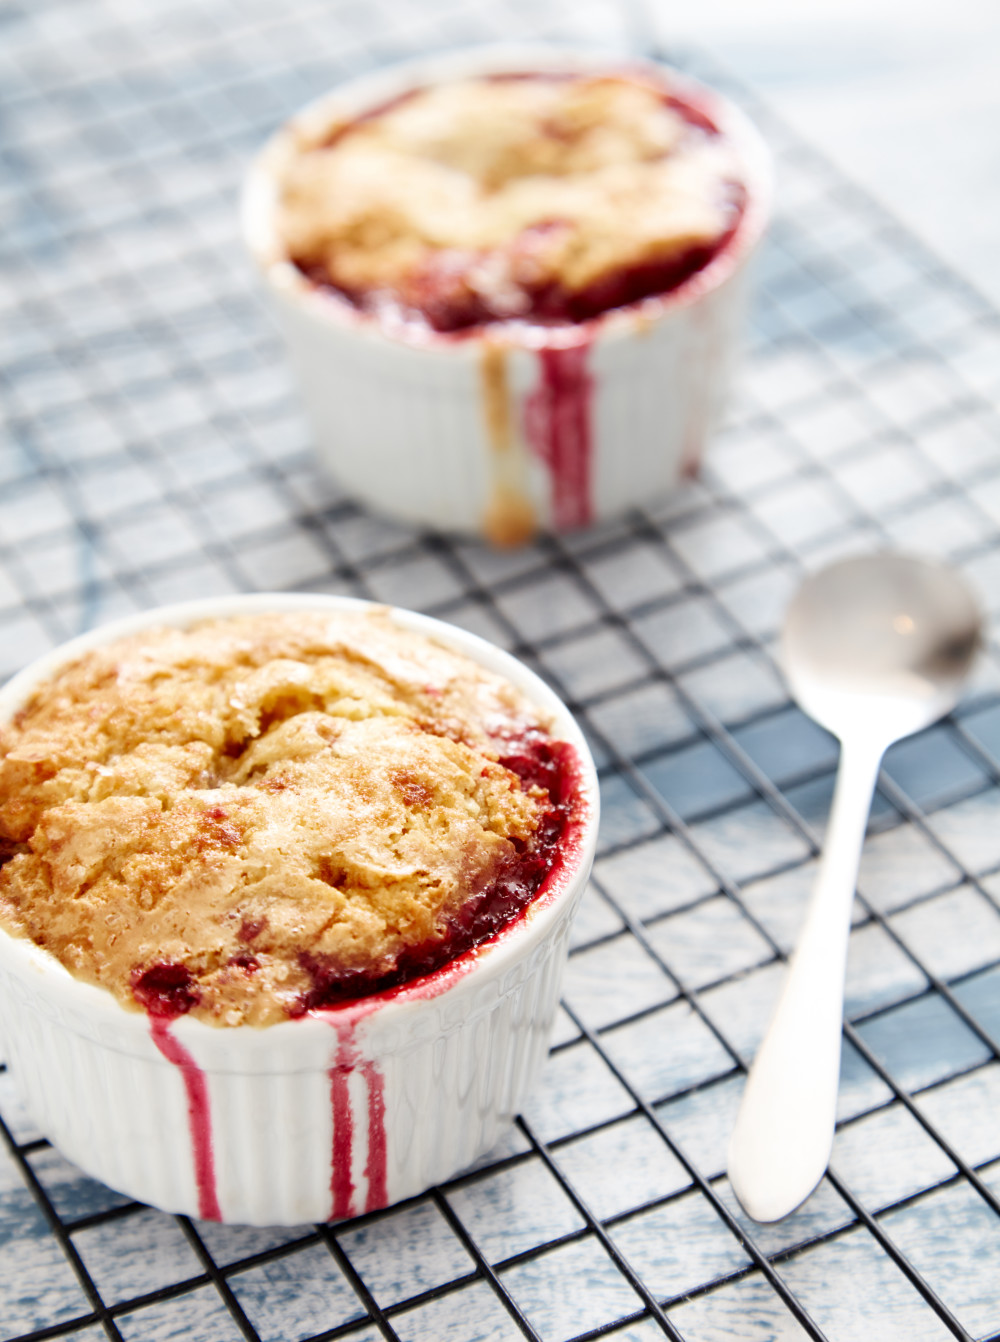 Easy to make Cherry Crumble in 5 Minutes Step-by-step Recipe